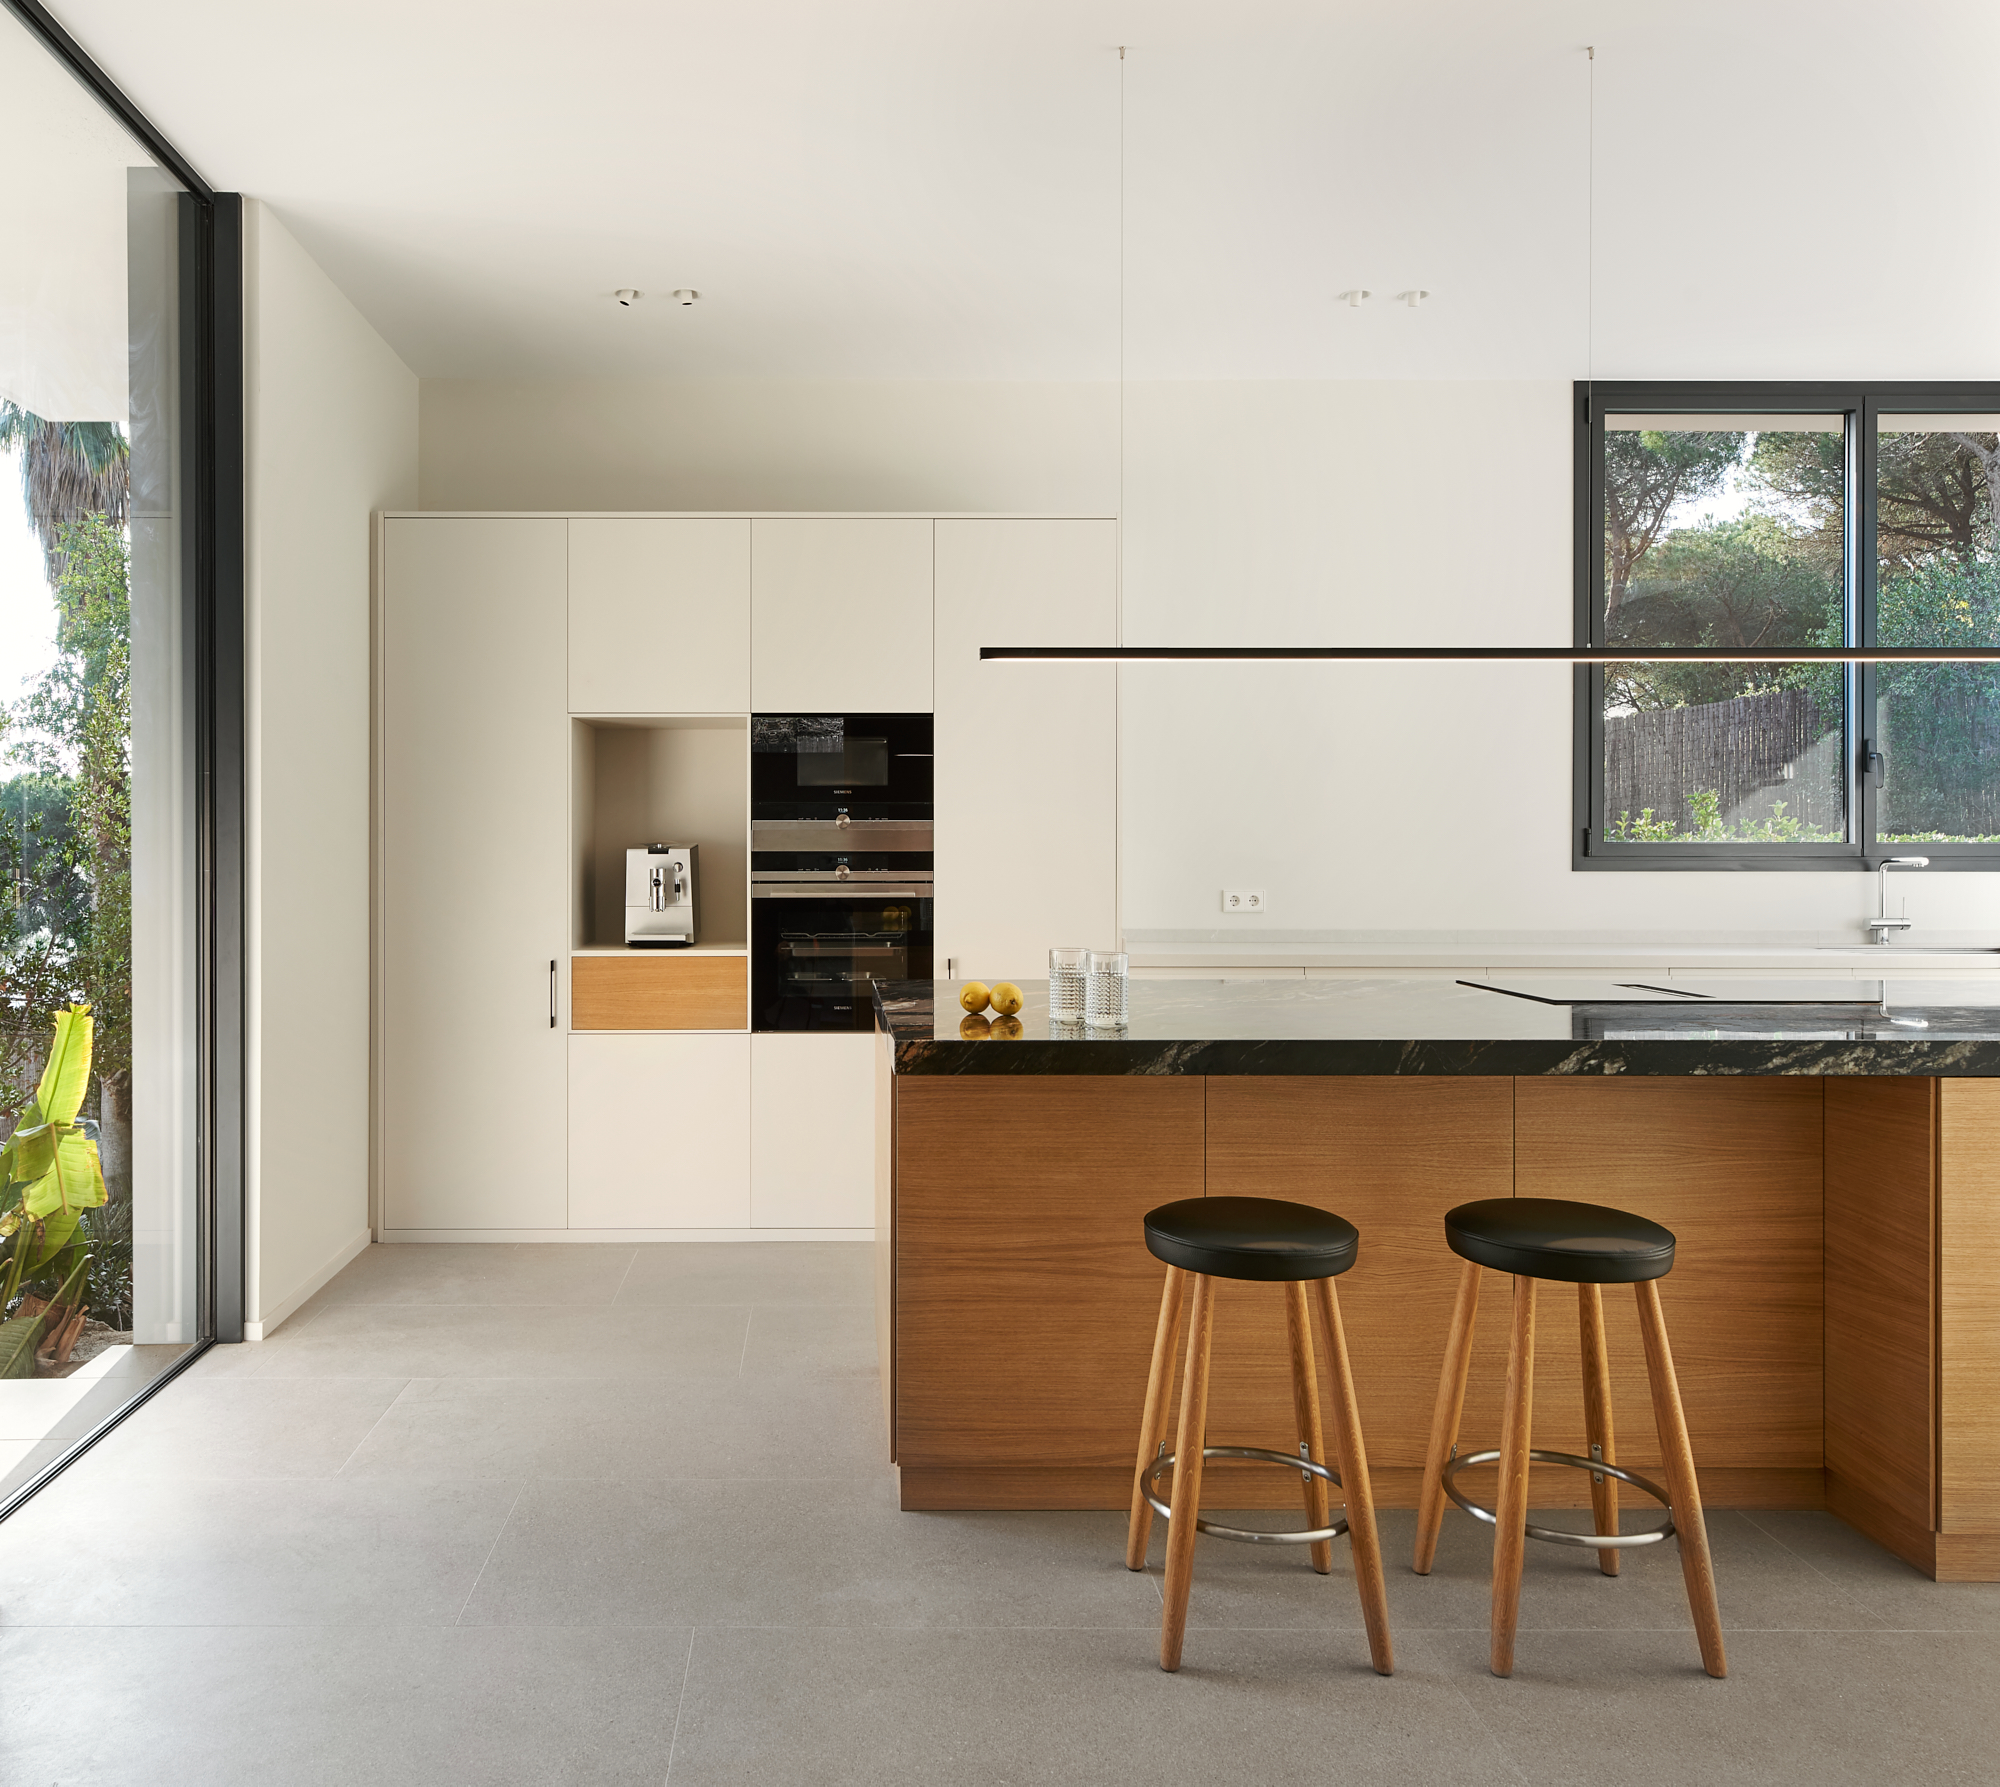 a kitchen island with two barstools with a view of the garden